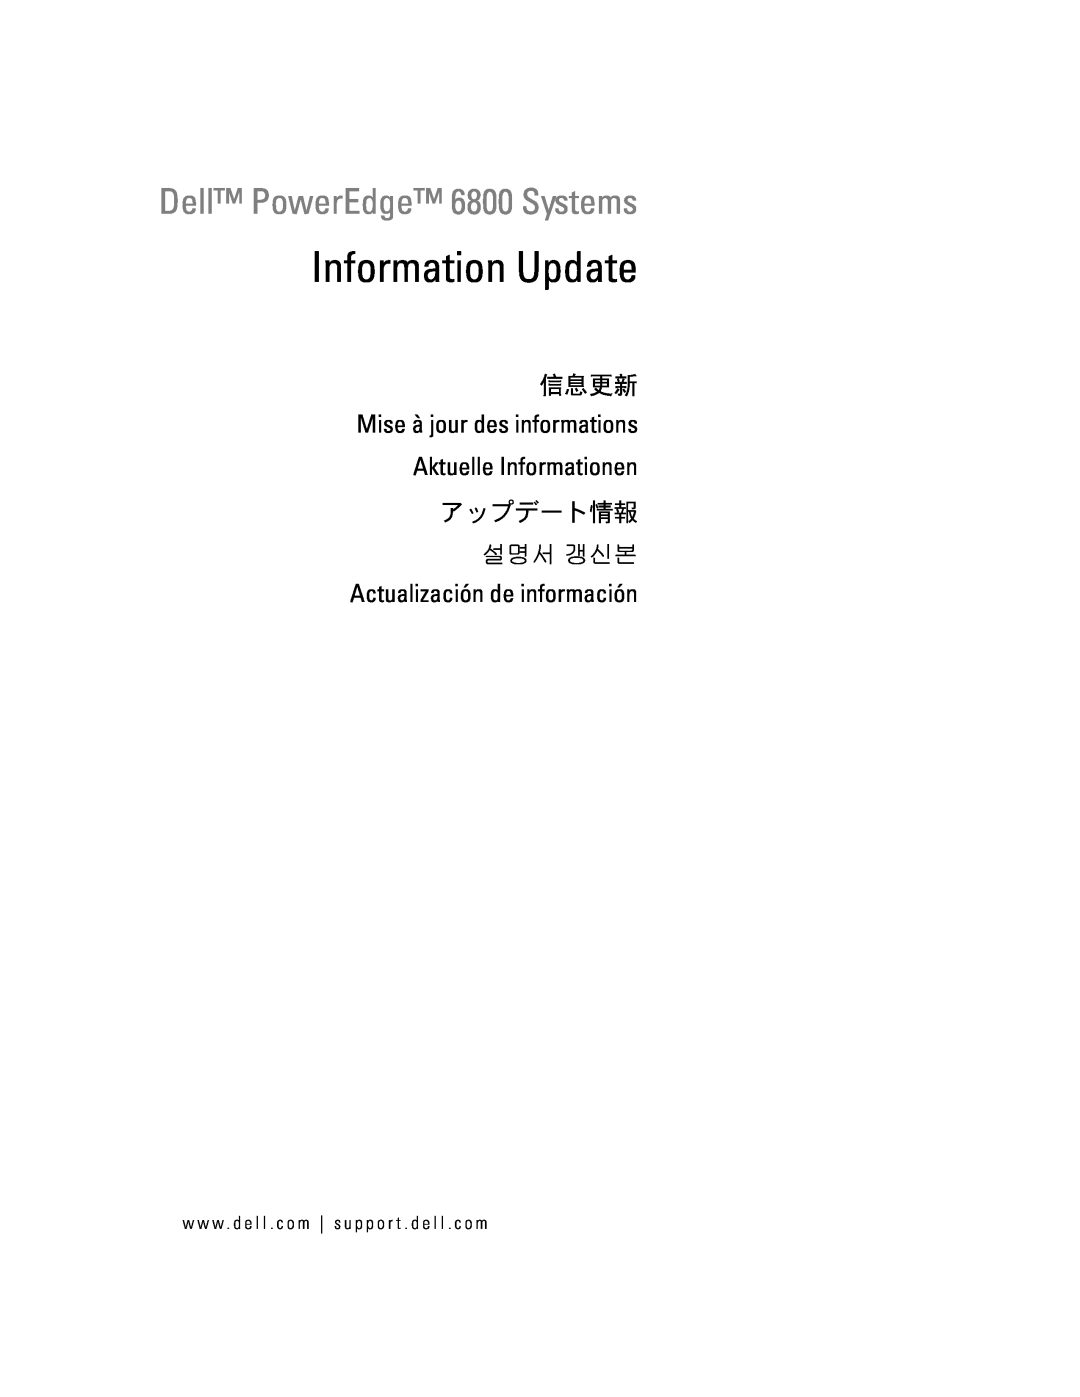 Dell manual Information Update, Dell PowerEdge 6800 Systems, 信息更新, Mise à jour des informations Aktuelle Informationen 